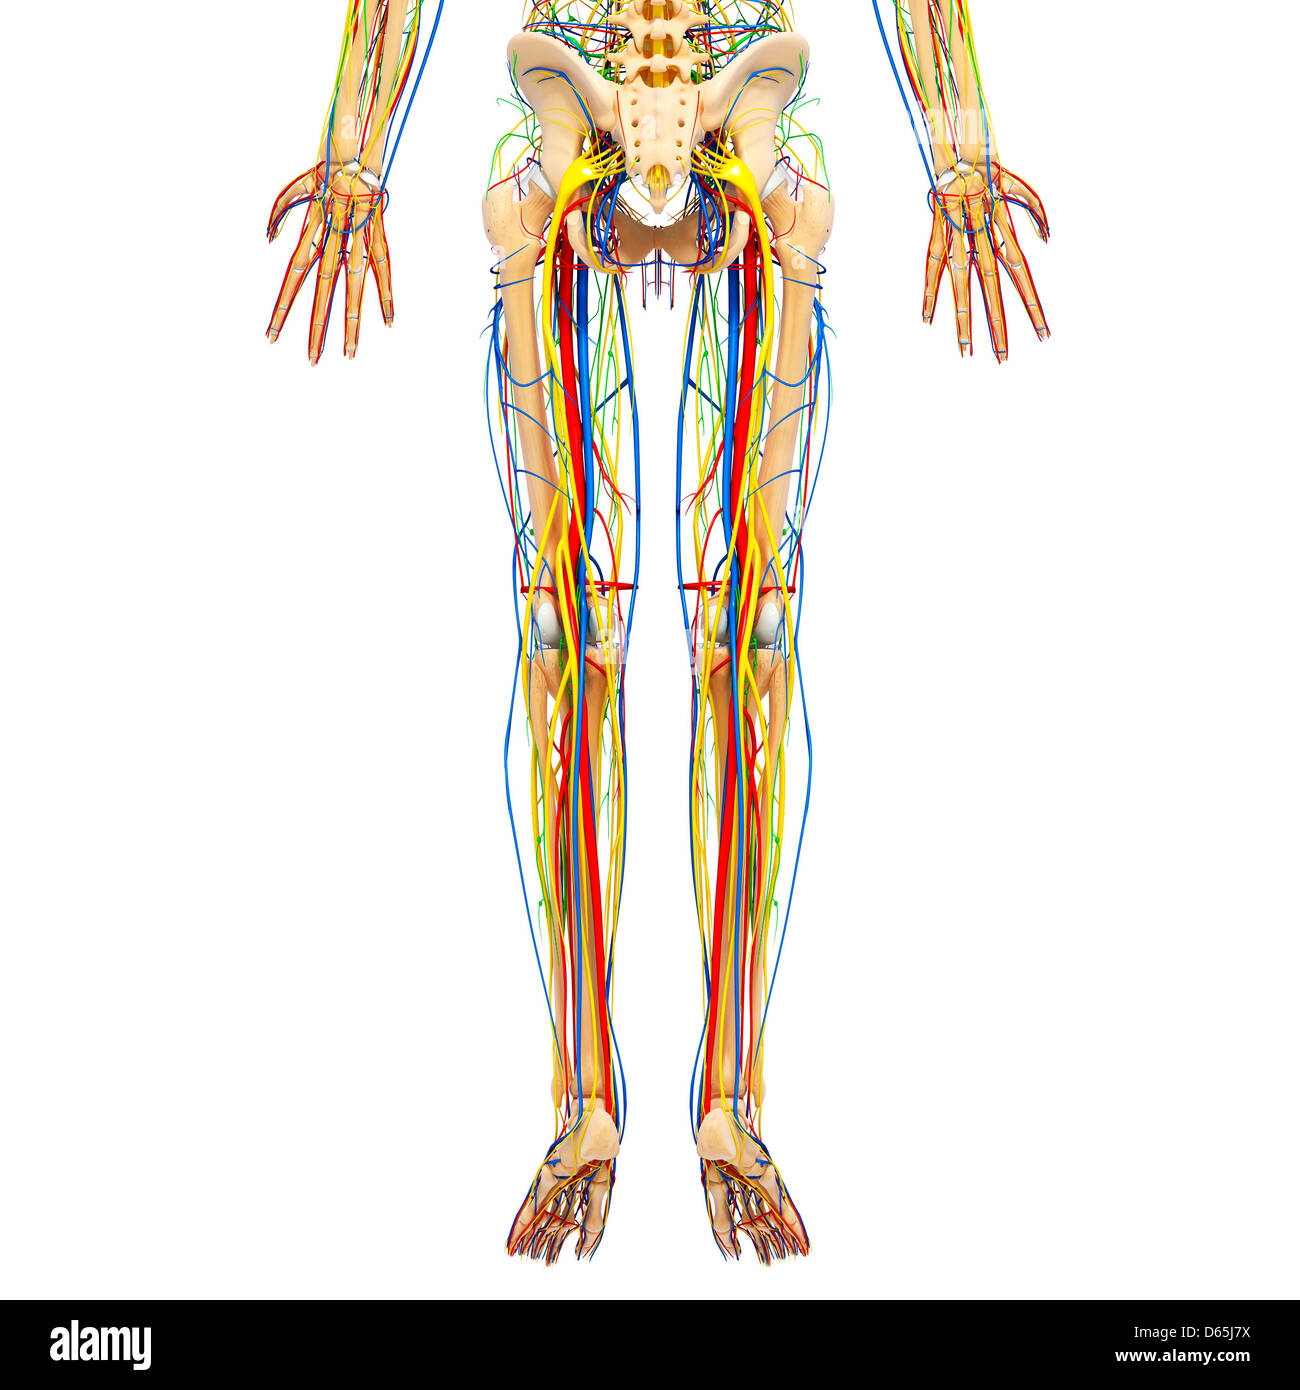 Lower Leg Anatomy High Resolution Stock Photography and Images - Alamy